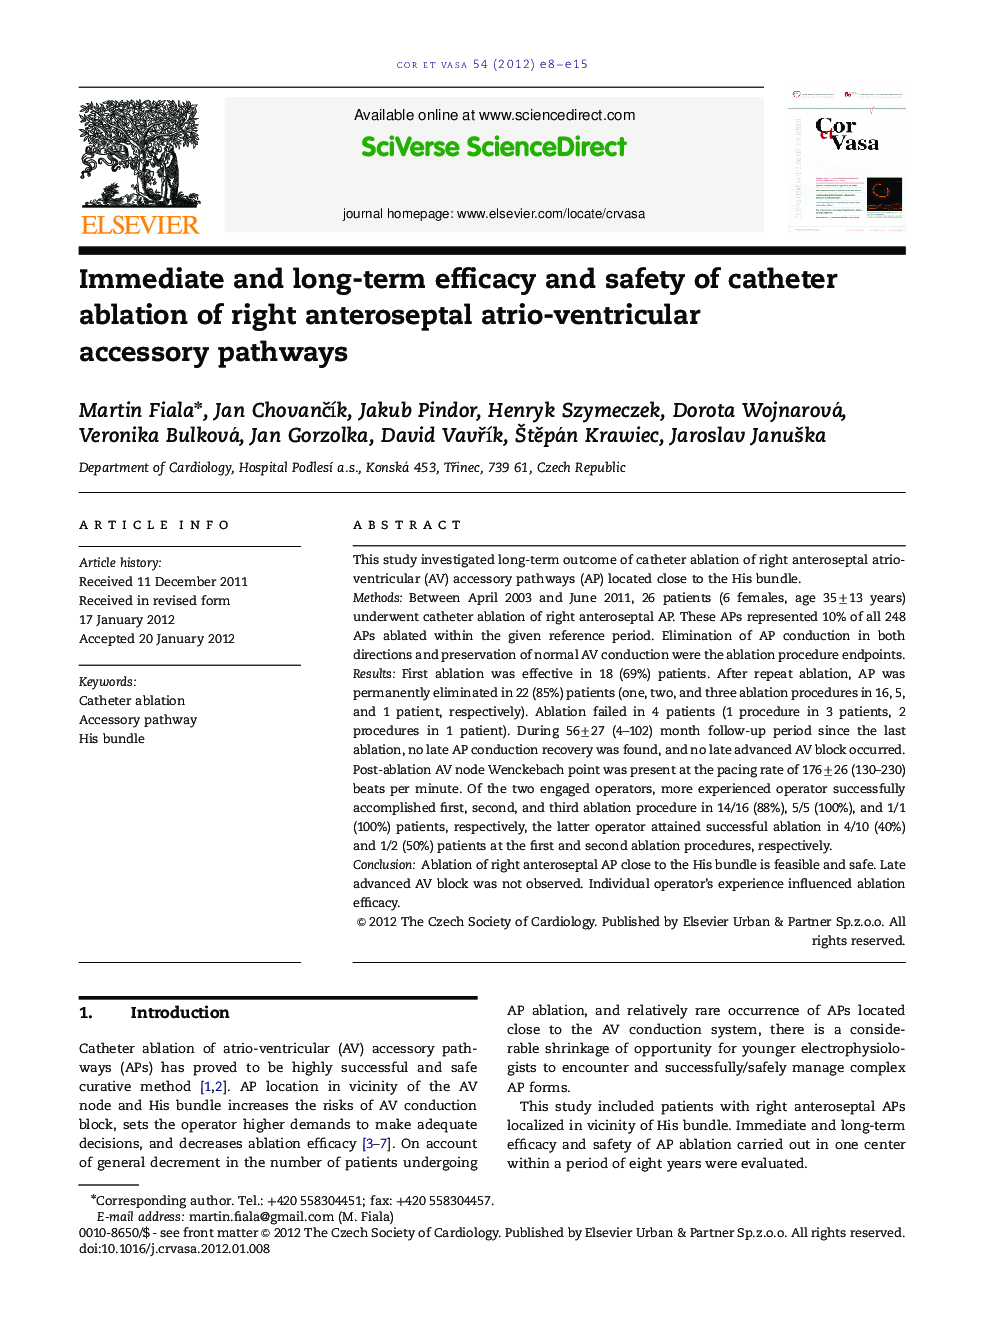 Immediate and long-term eff icacy and safety of catheter ablation of right anteroseptal atrio-ventricular accessory pathways